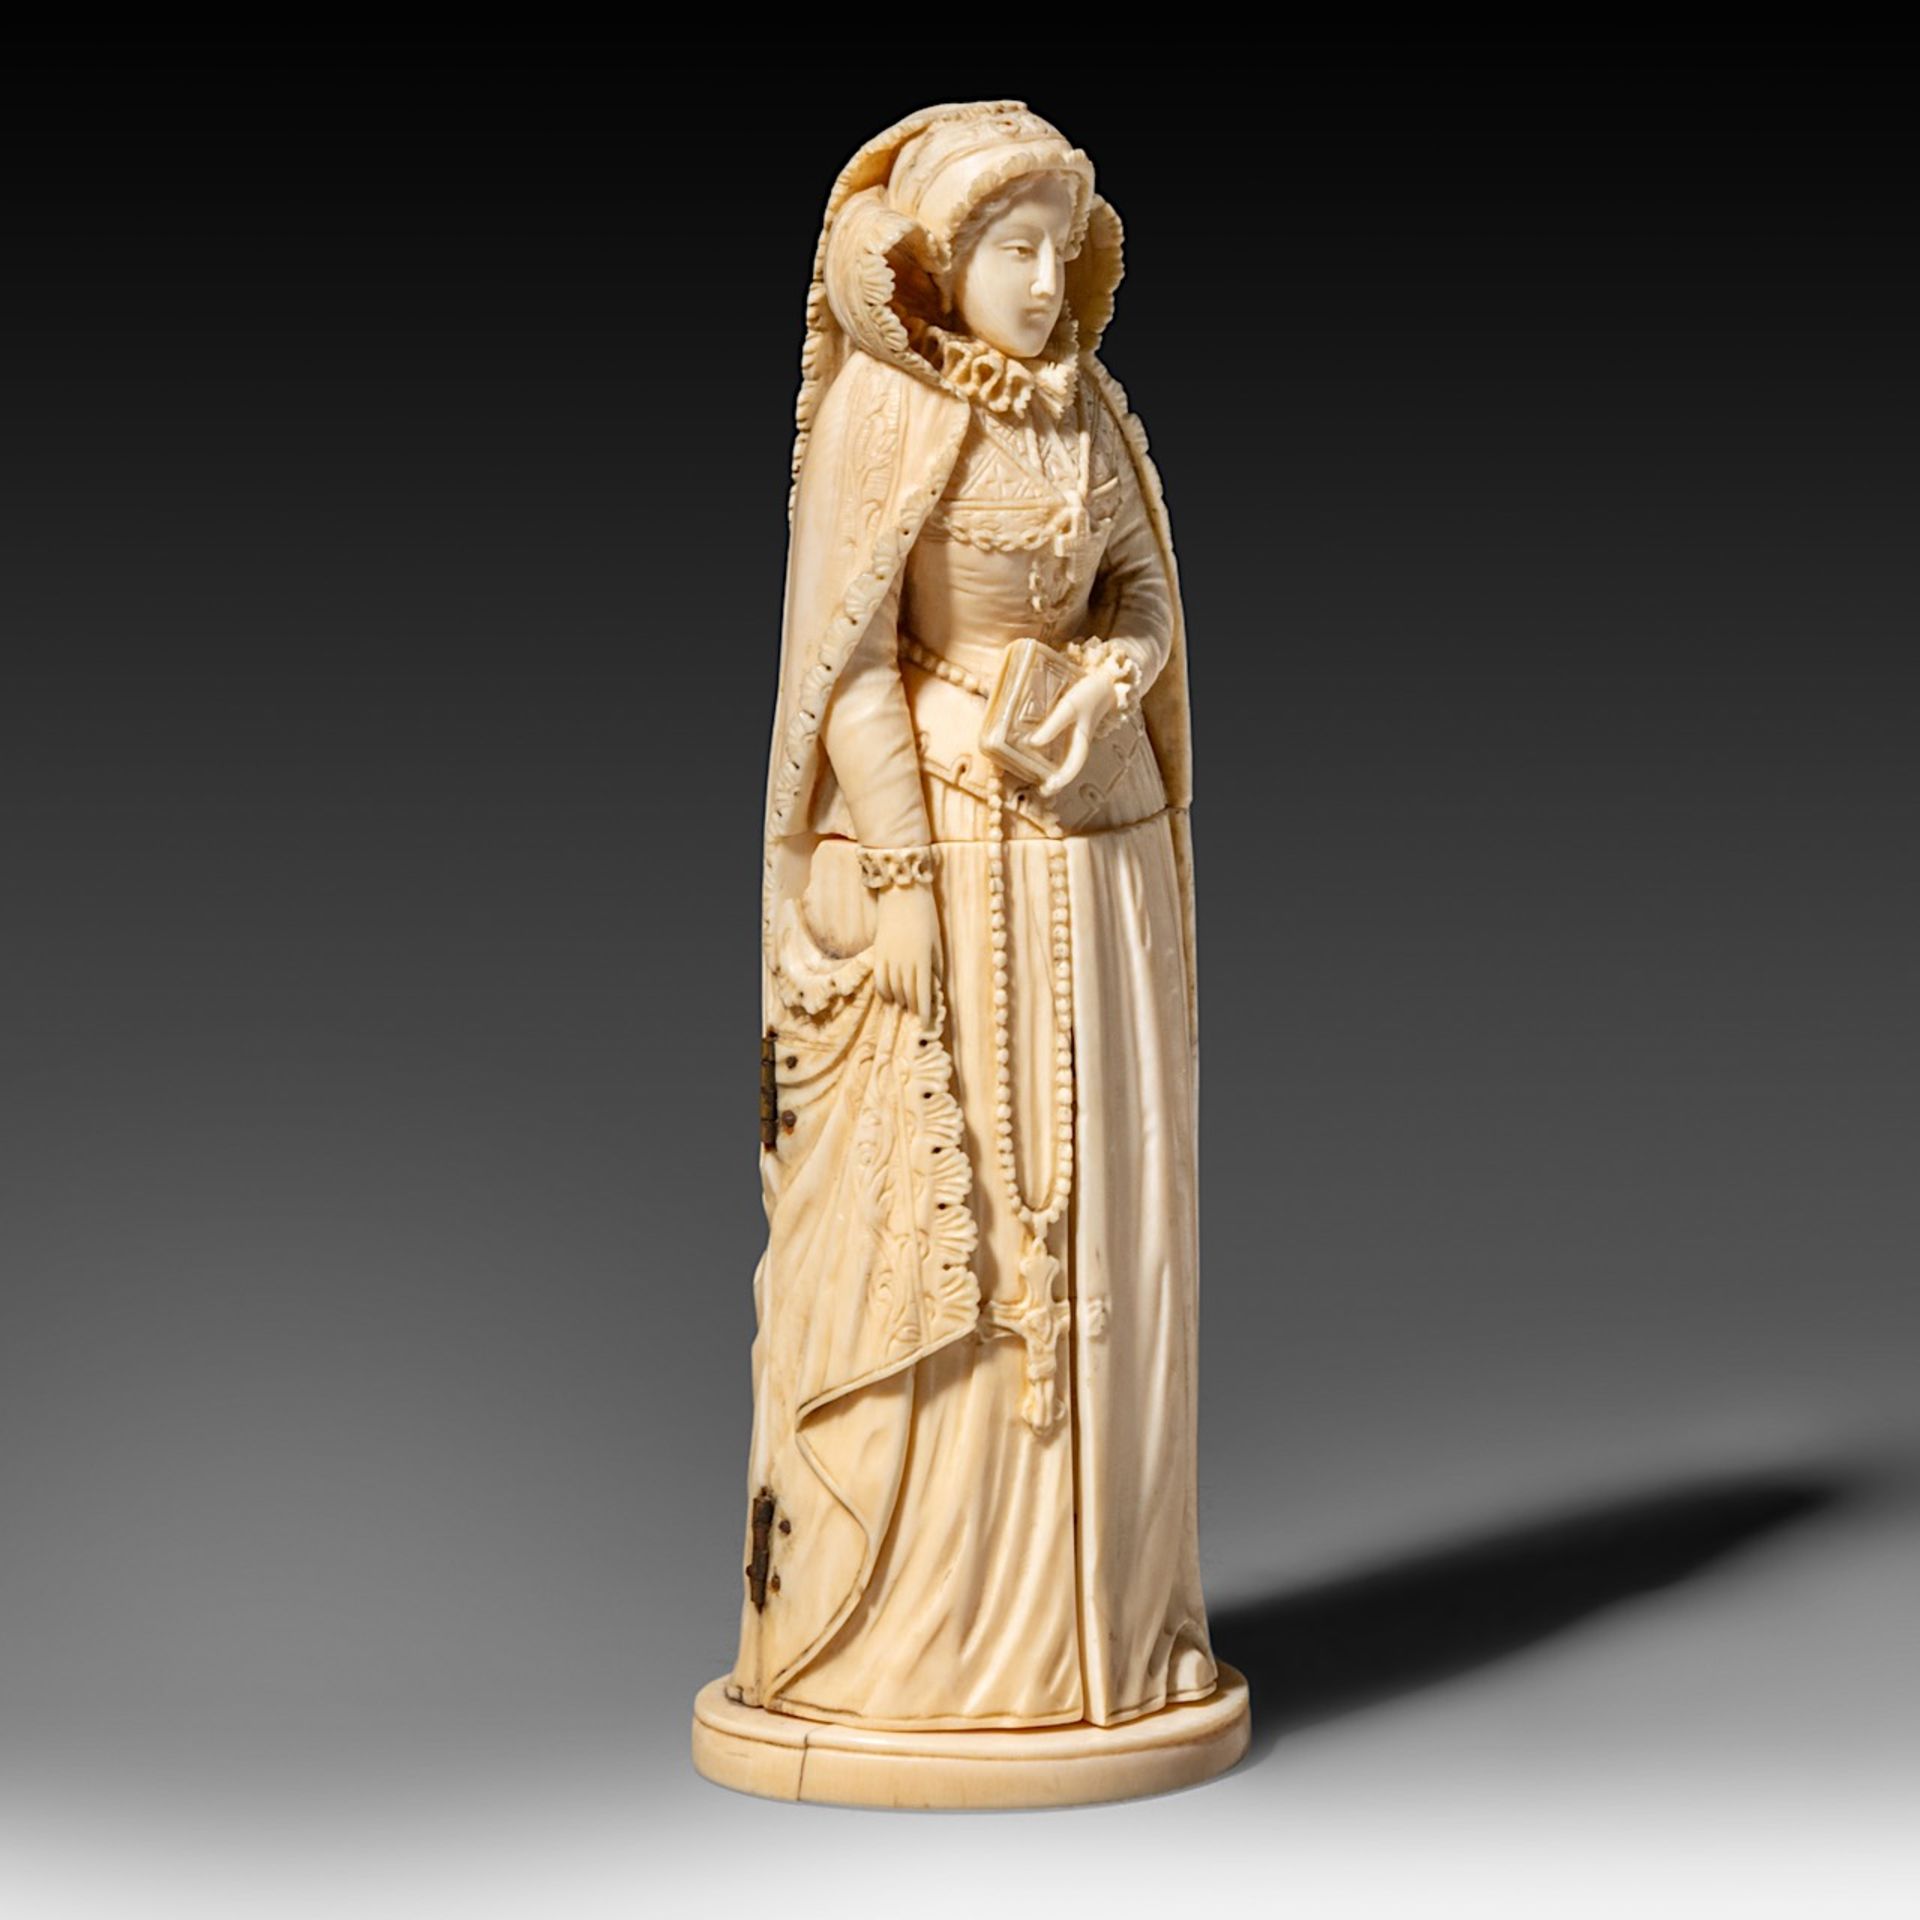 An ivory triptych sculpture of probably Mary Queen of Scots, French, 19thC, H 20 cm - 447 g (+) - Image 7 of 12